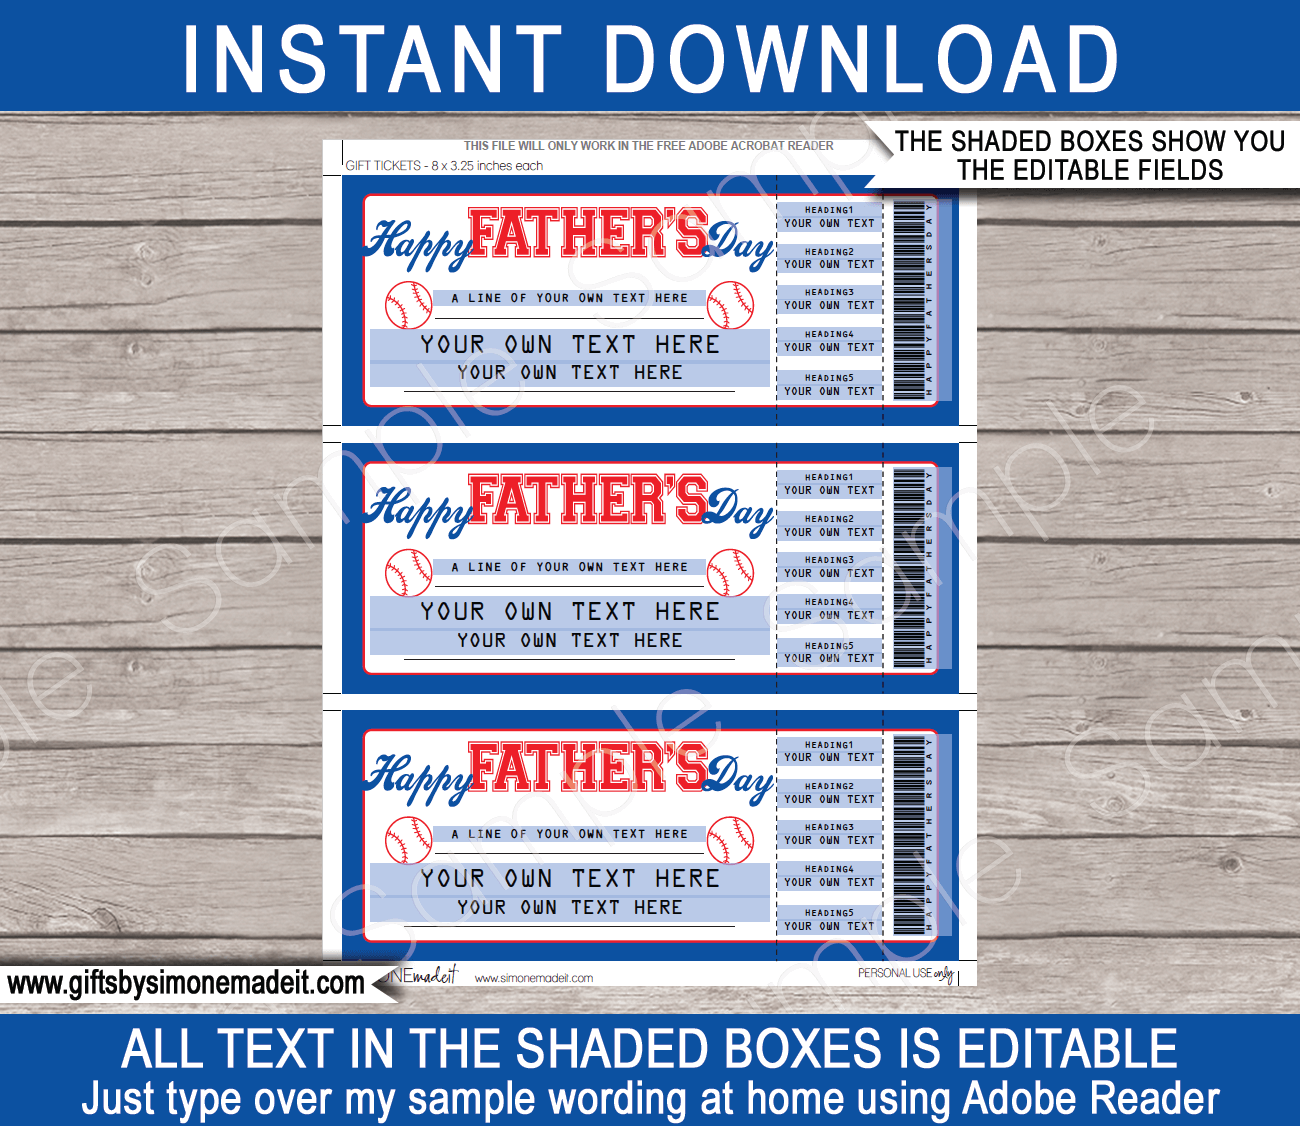 Printable Father's Day Baseball Ticket Gift Voucher Template - Surprise tickets to a Baseball Game for Dad - Gift Certificate - Father's Day present - DIY Editable & Printable Template - INSTANT DOWNLOAD via giftsbysimonemadeit.com #lastminutegift #giftfordad #fathersdaygift